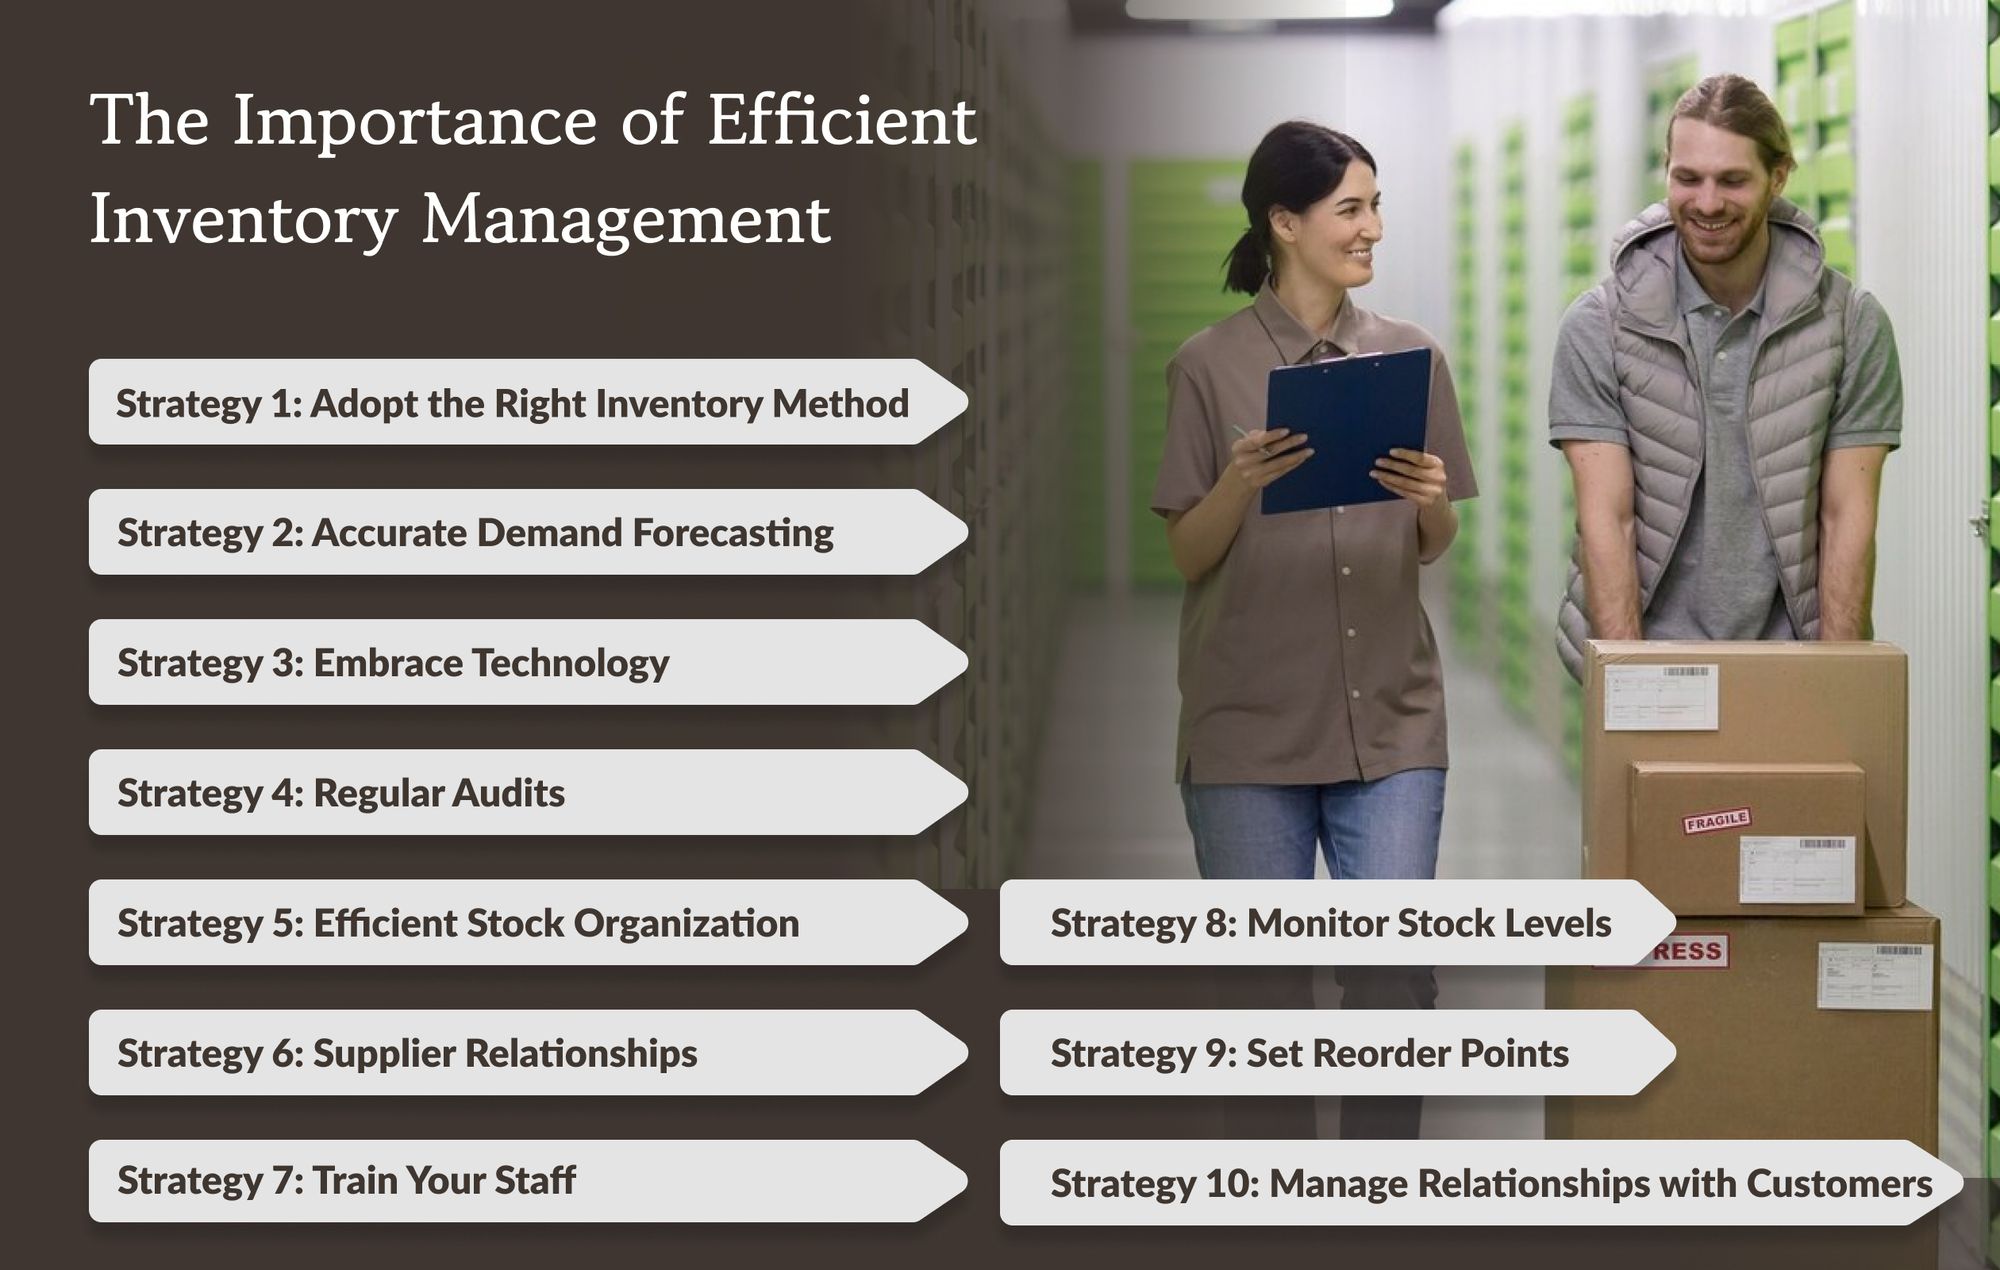 The Importance of Efficient Inventory Management